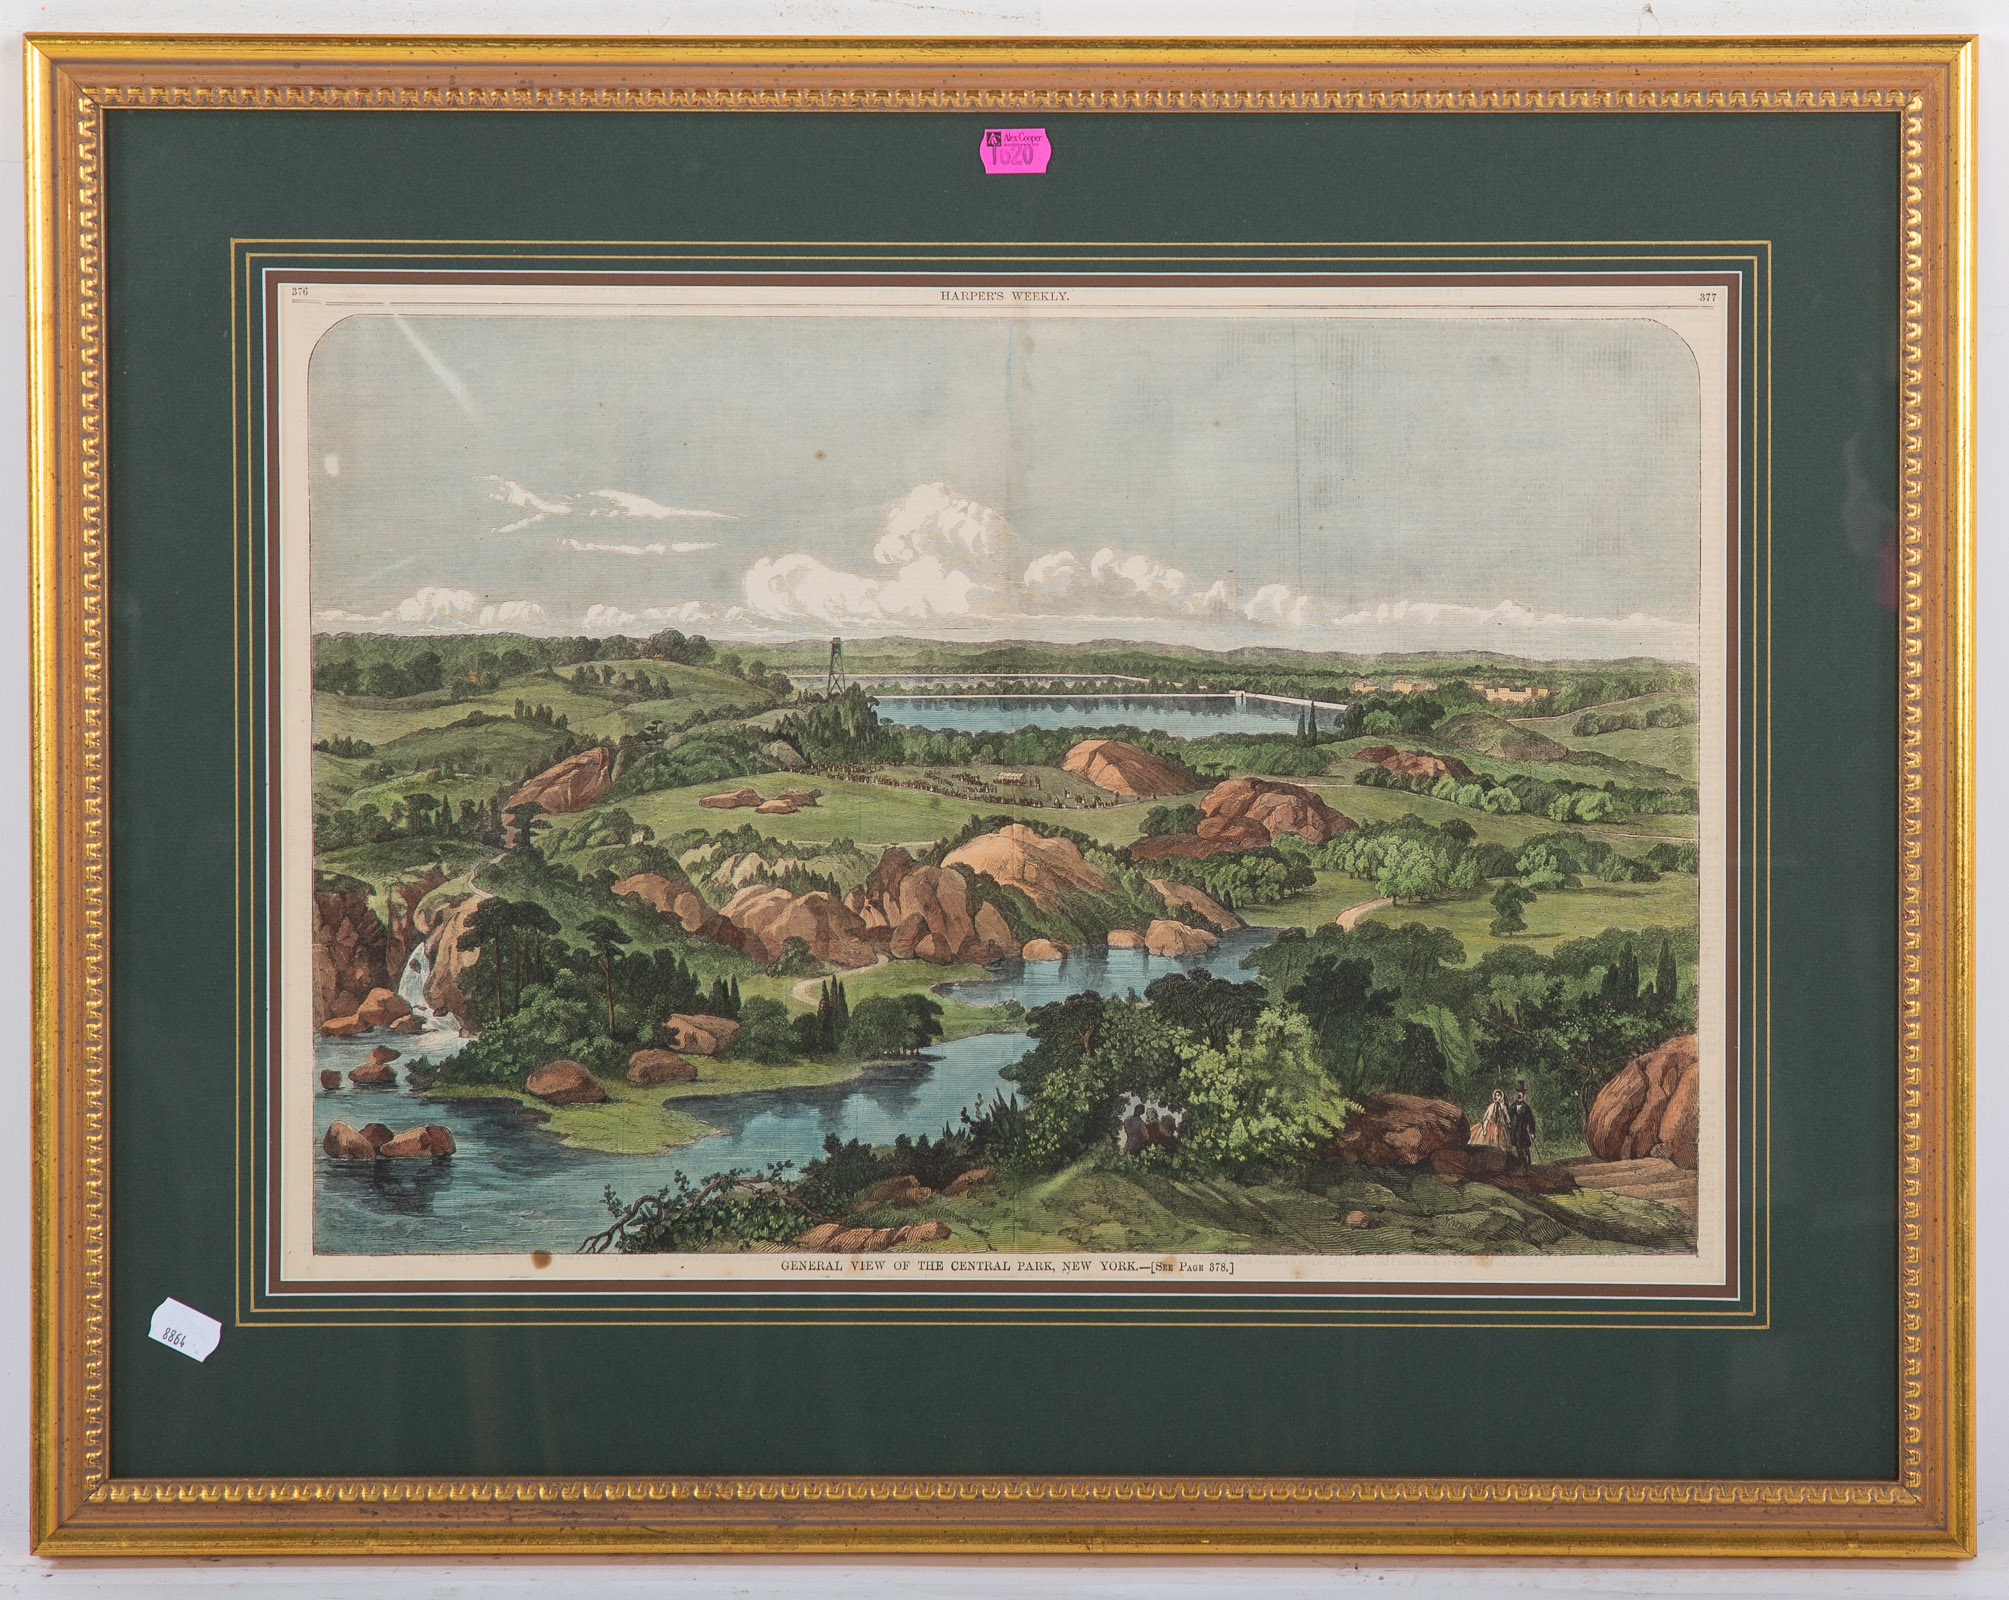 "GENERAL VIEW OF THE CENTRAL PARK,